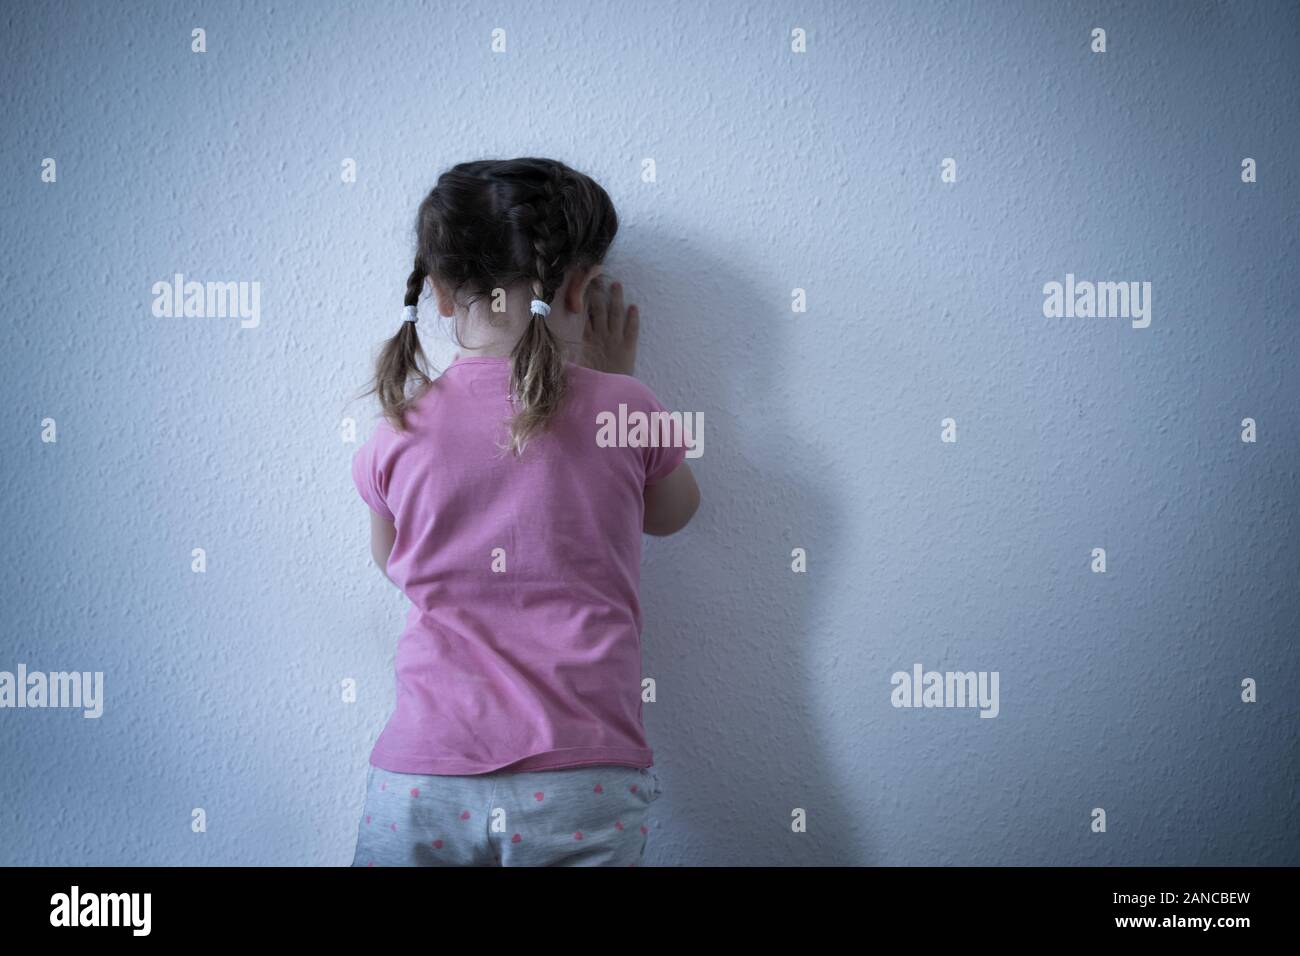 Little Girl Crying. Very Sad Girl Covering Her Eyes Stock Photo ...